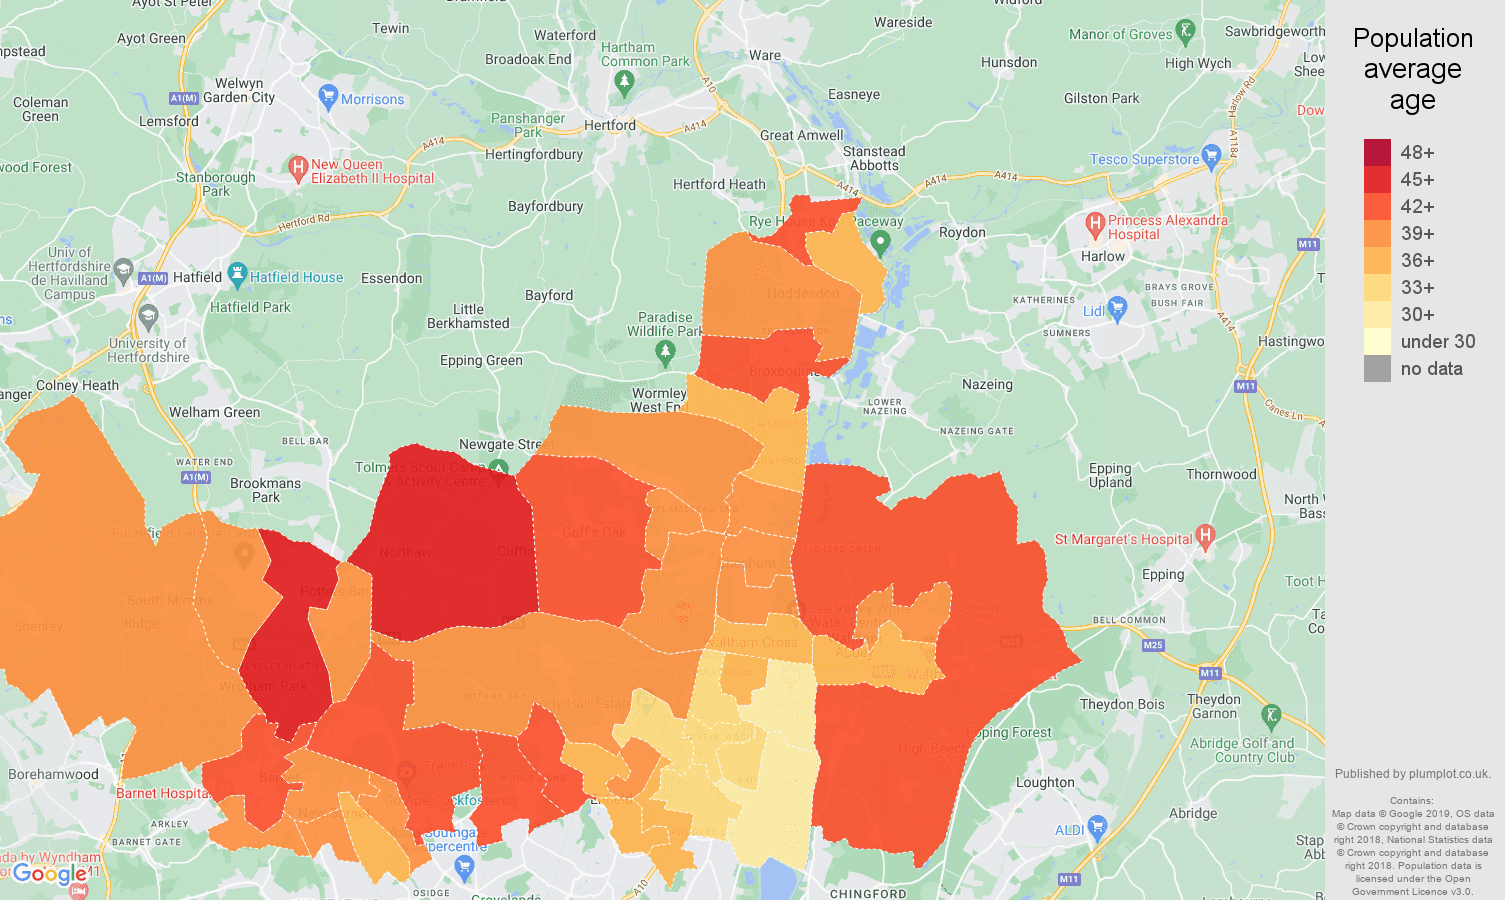 Enfield population average age map